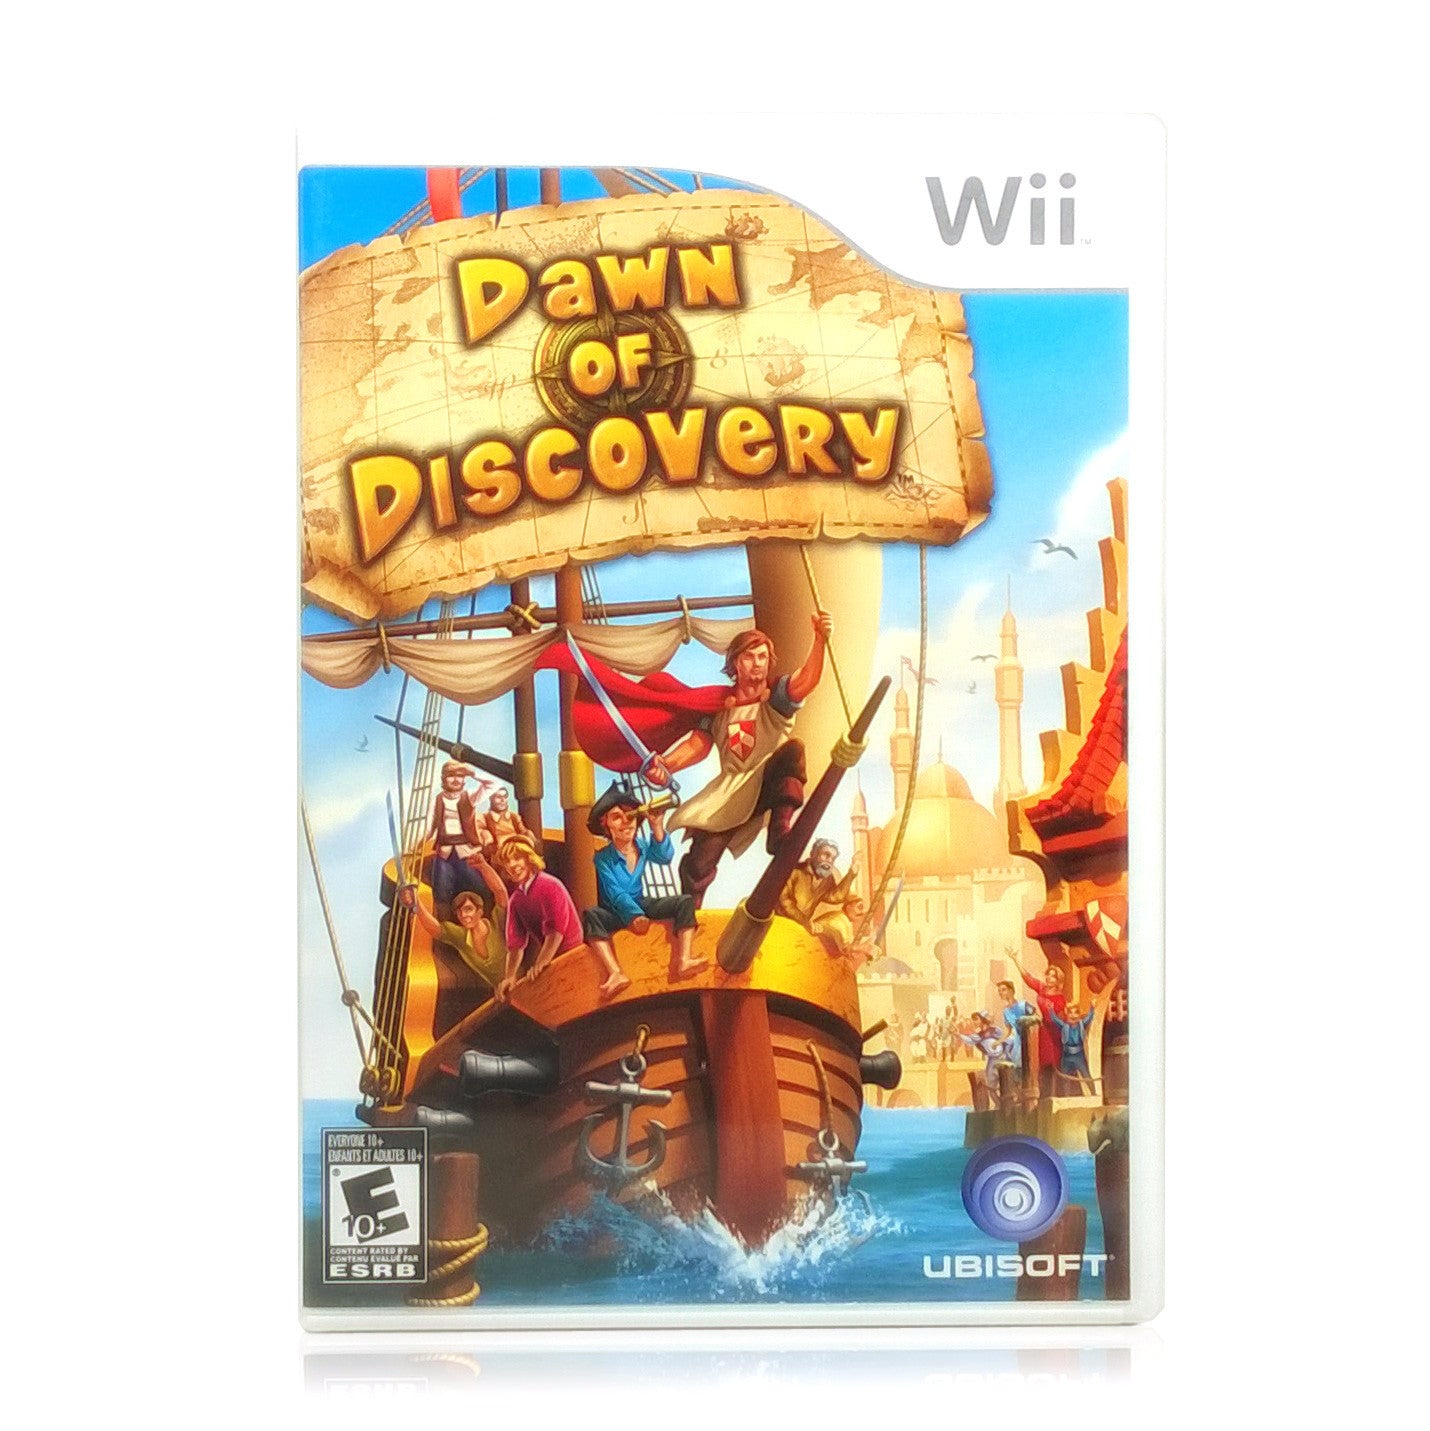 Dawn of Discovery Nintendo Wii Game - Case